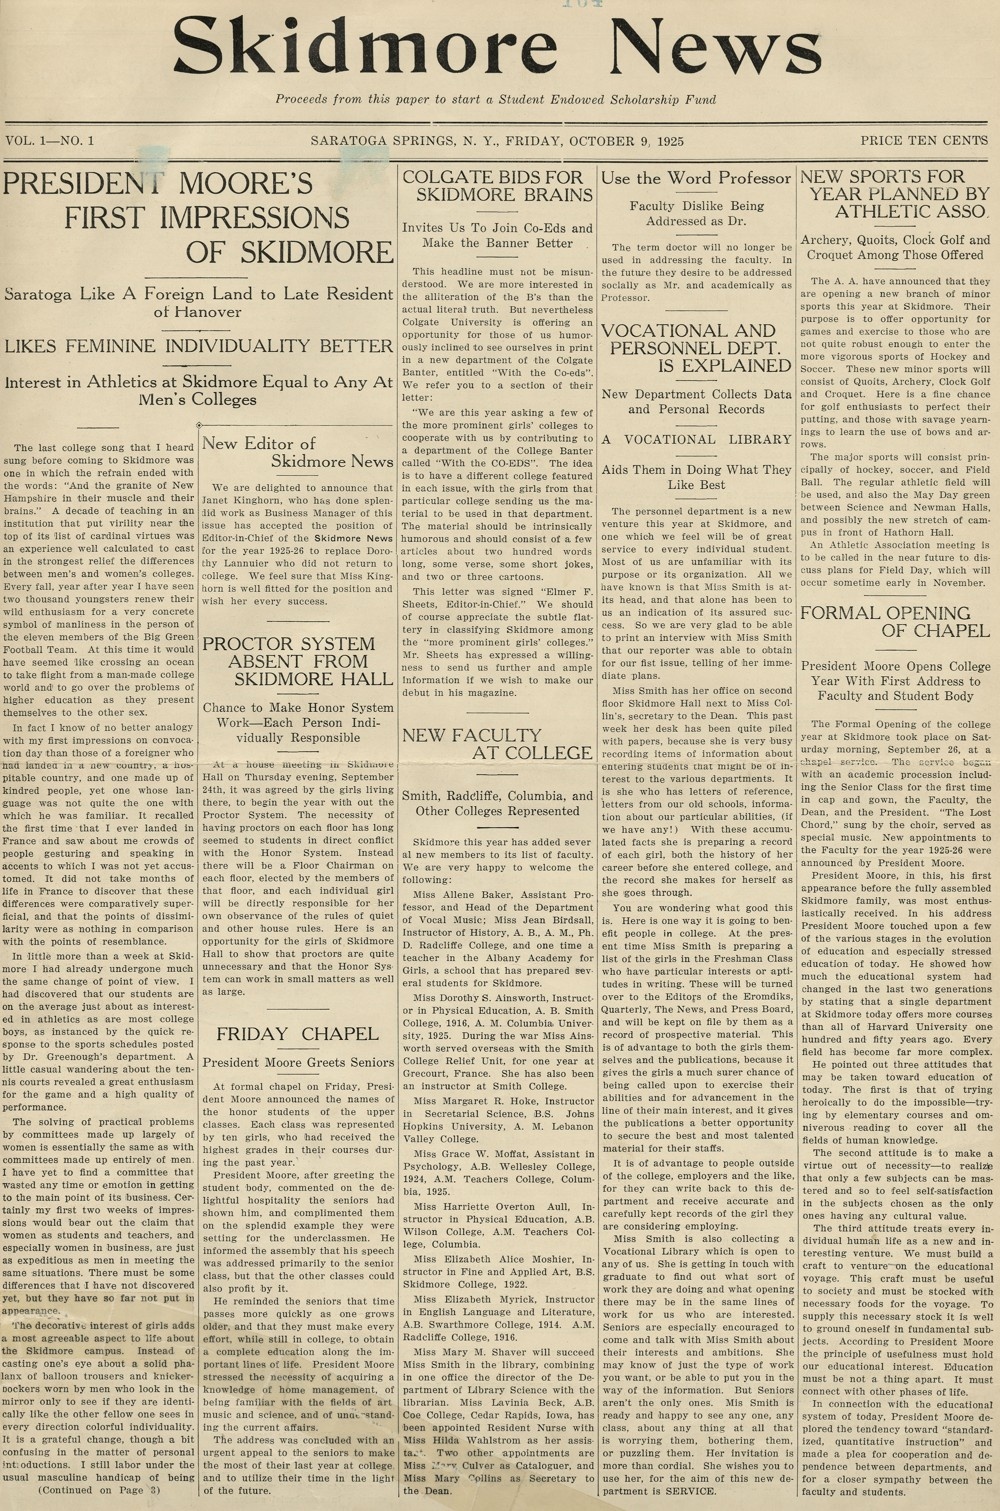 The yellowed front page of a Skidmore News issue features several articles with larger titles and small print text divided into five columns.  